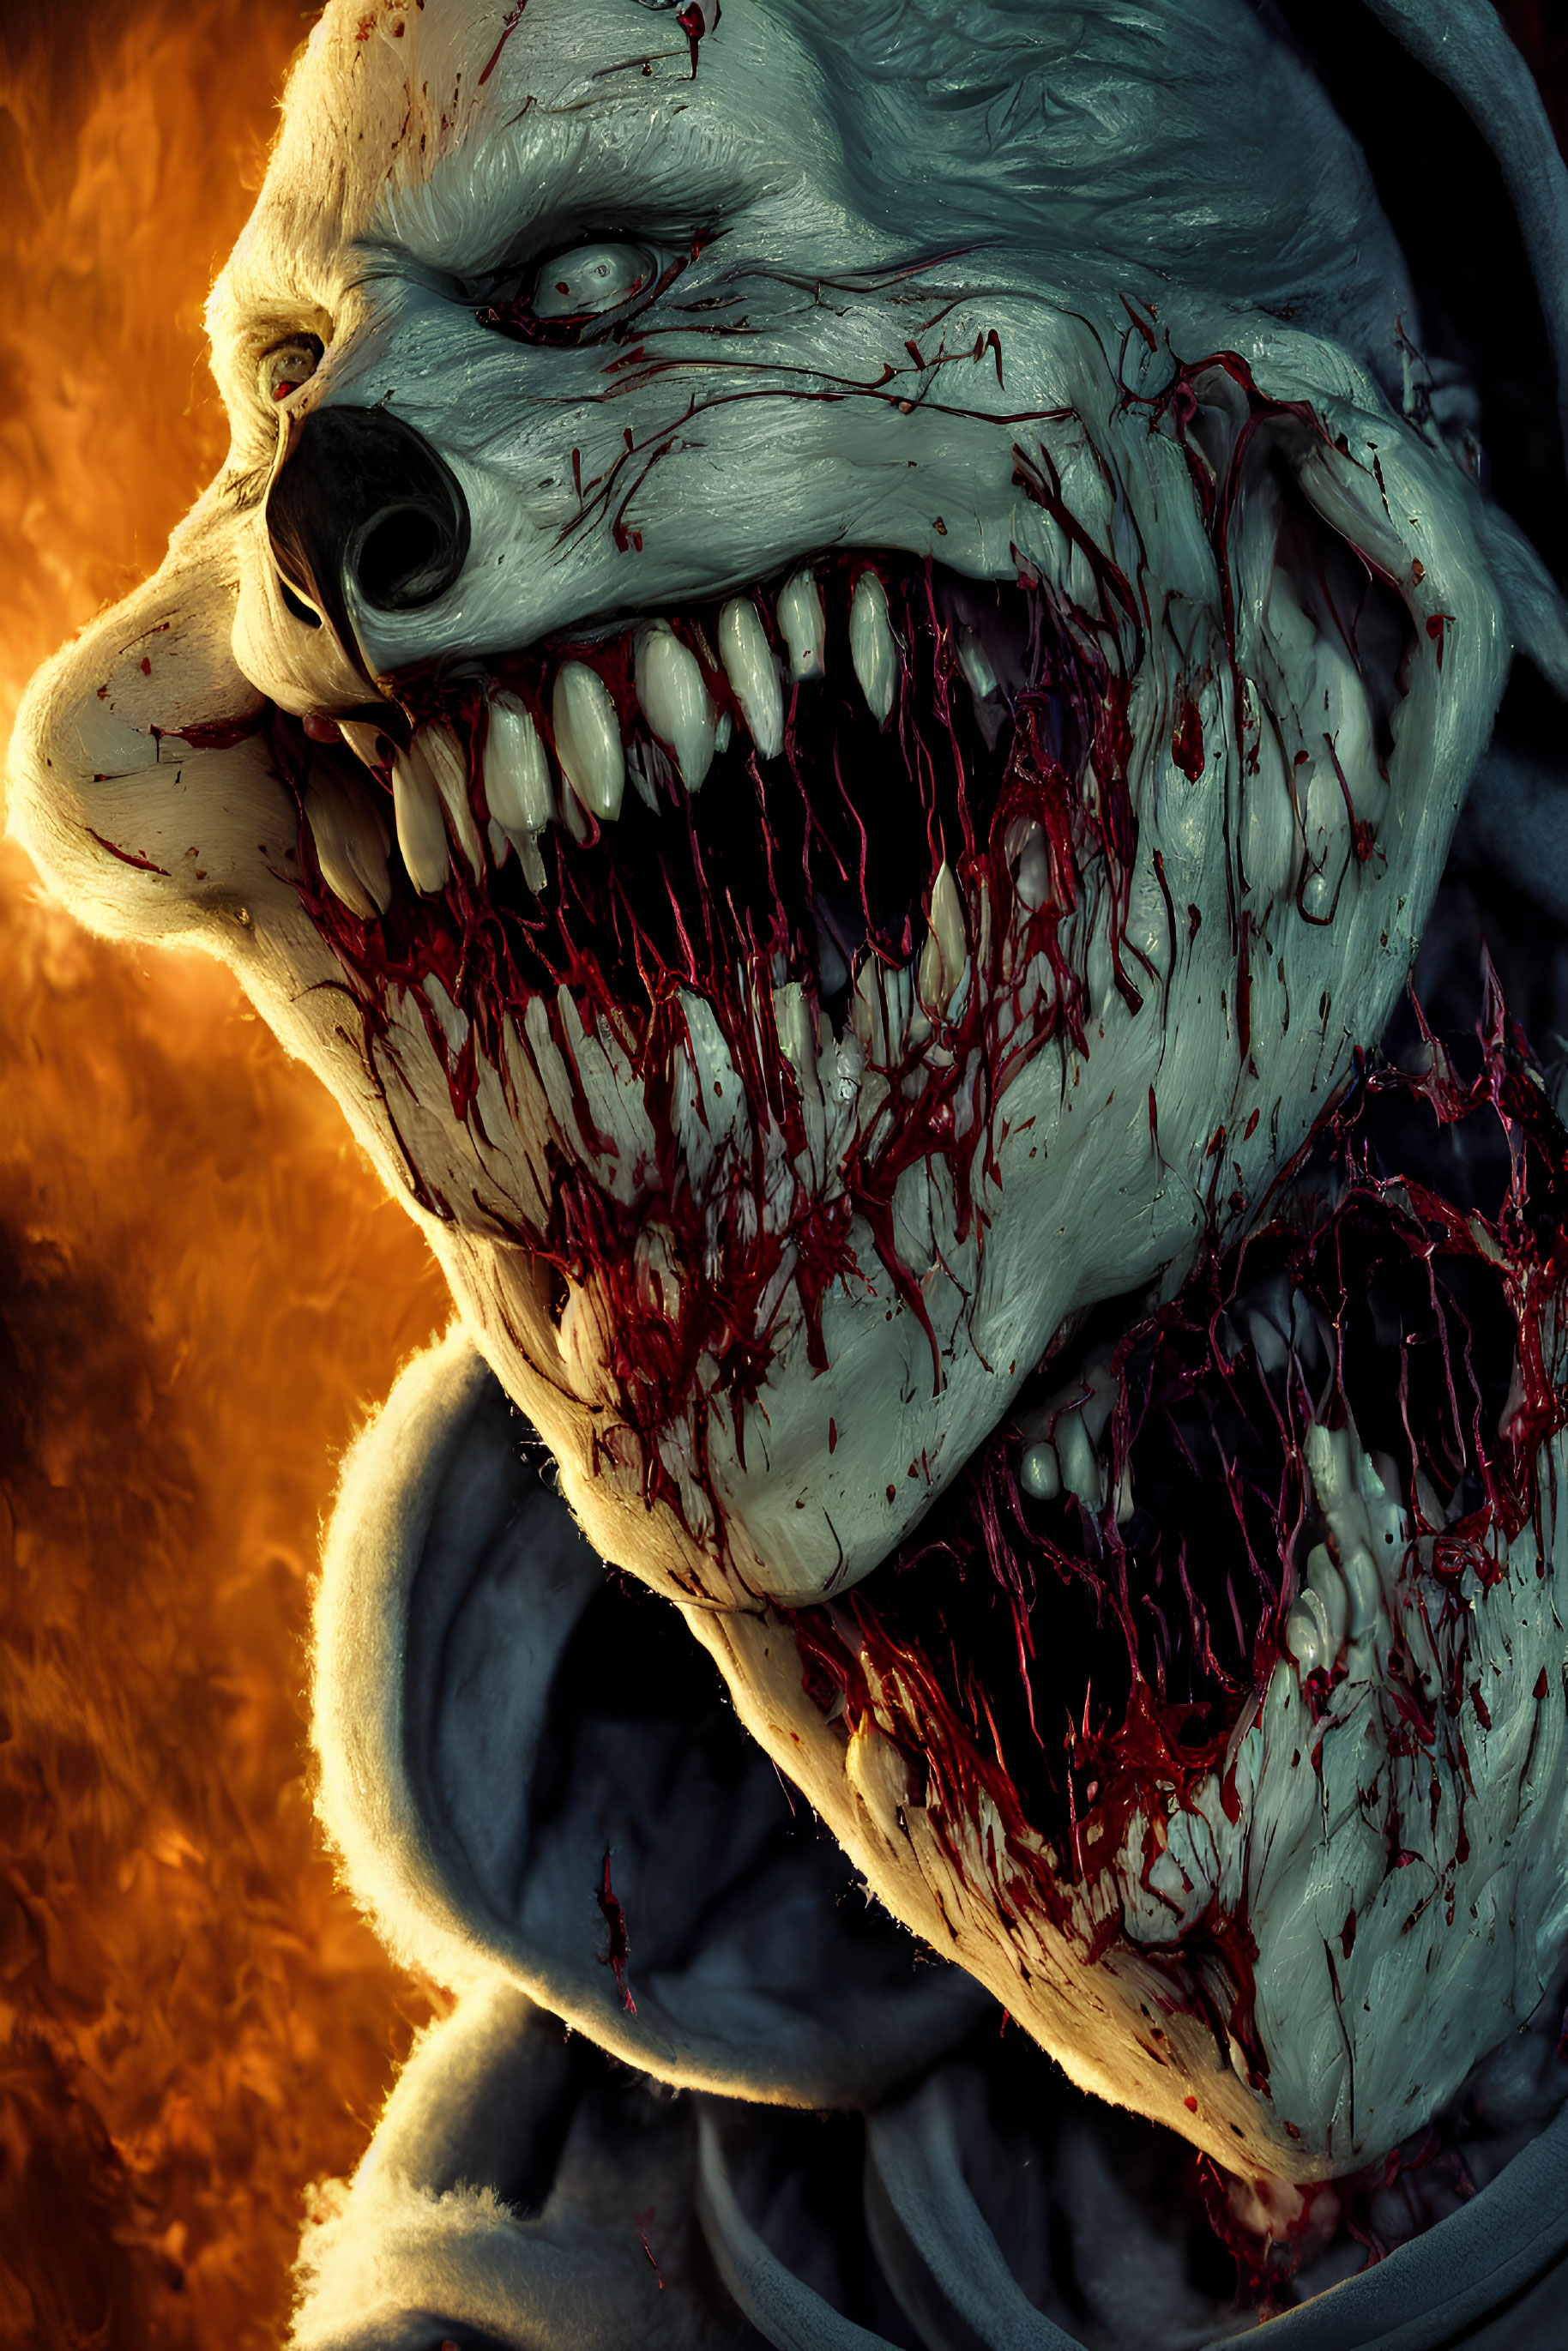 Menacing werewolf with bloodied fangs in fiery setting